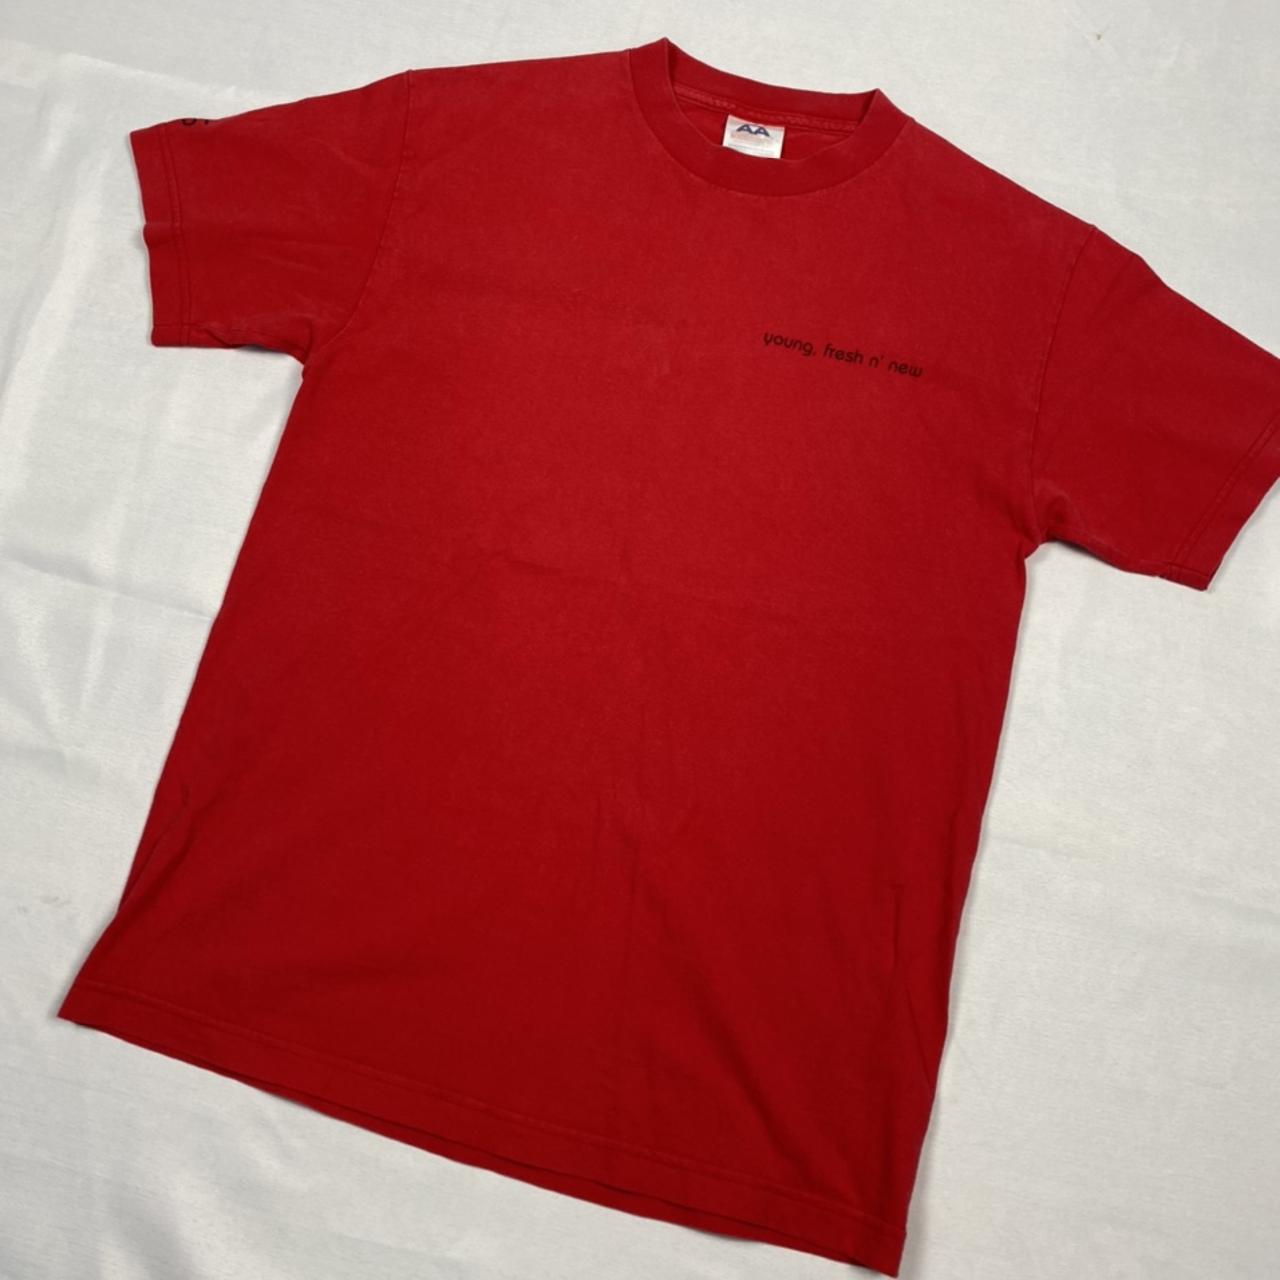 Kelis T-shirt for ‘Young, Fresh n New’ in Red Size M... - Depop